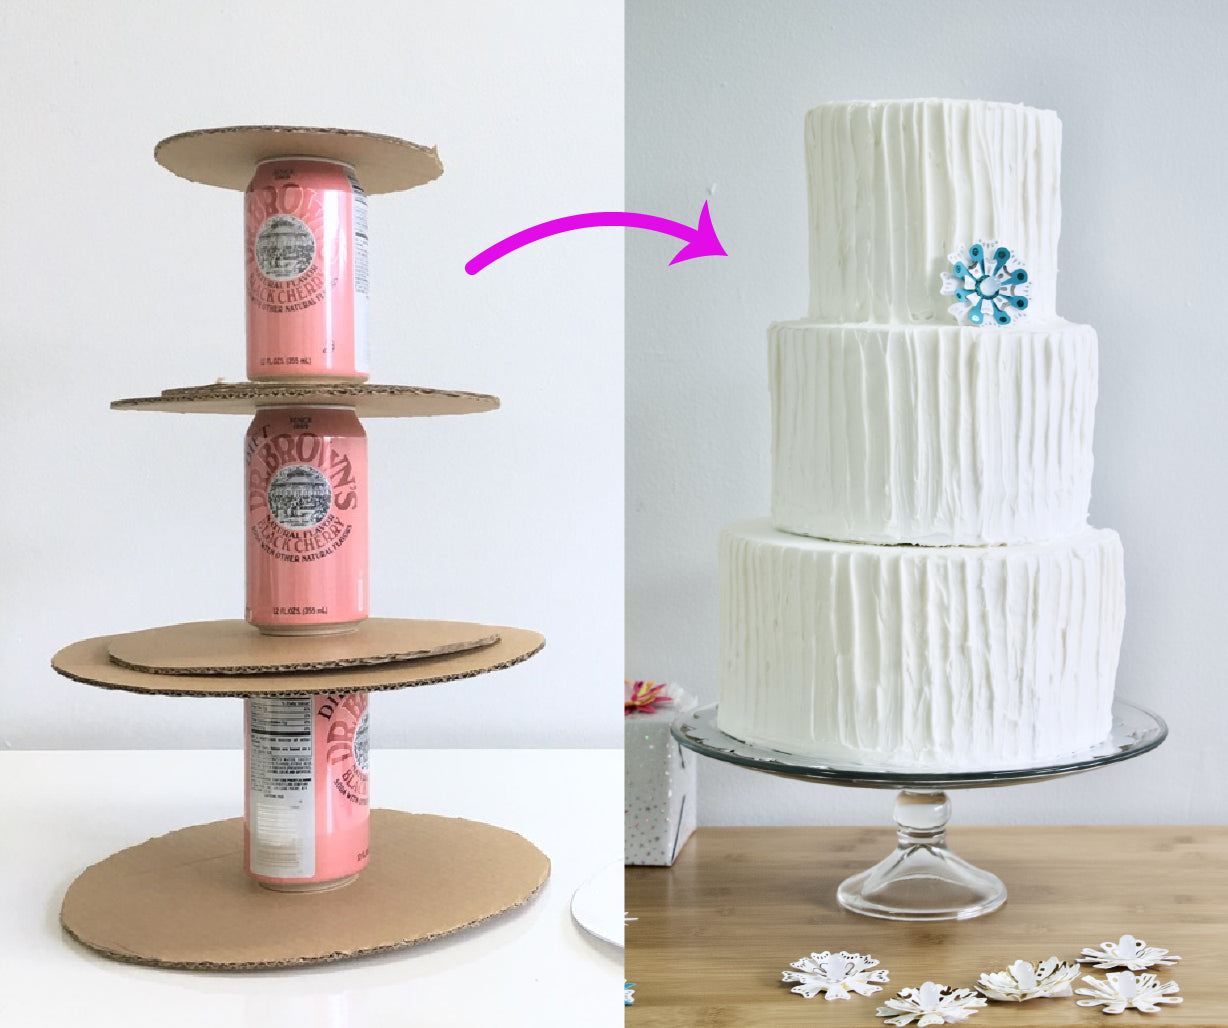 Easy Fake Prop Cake From Cardboard & Soda Cans